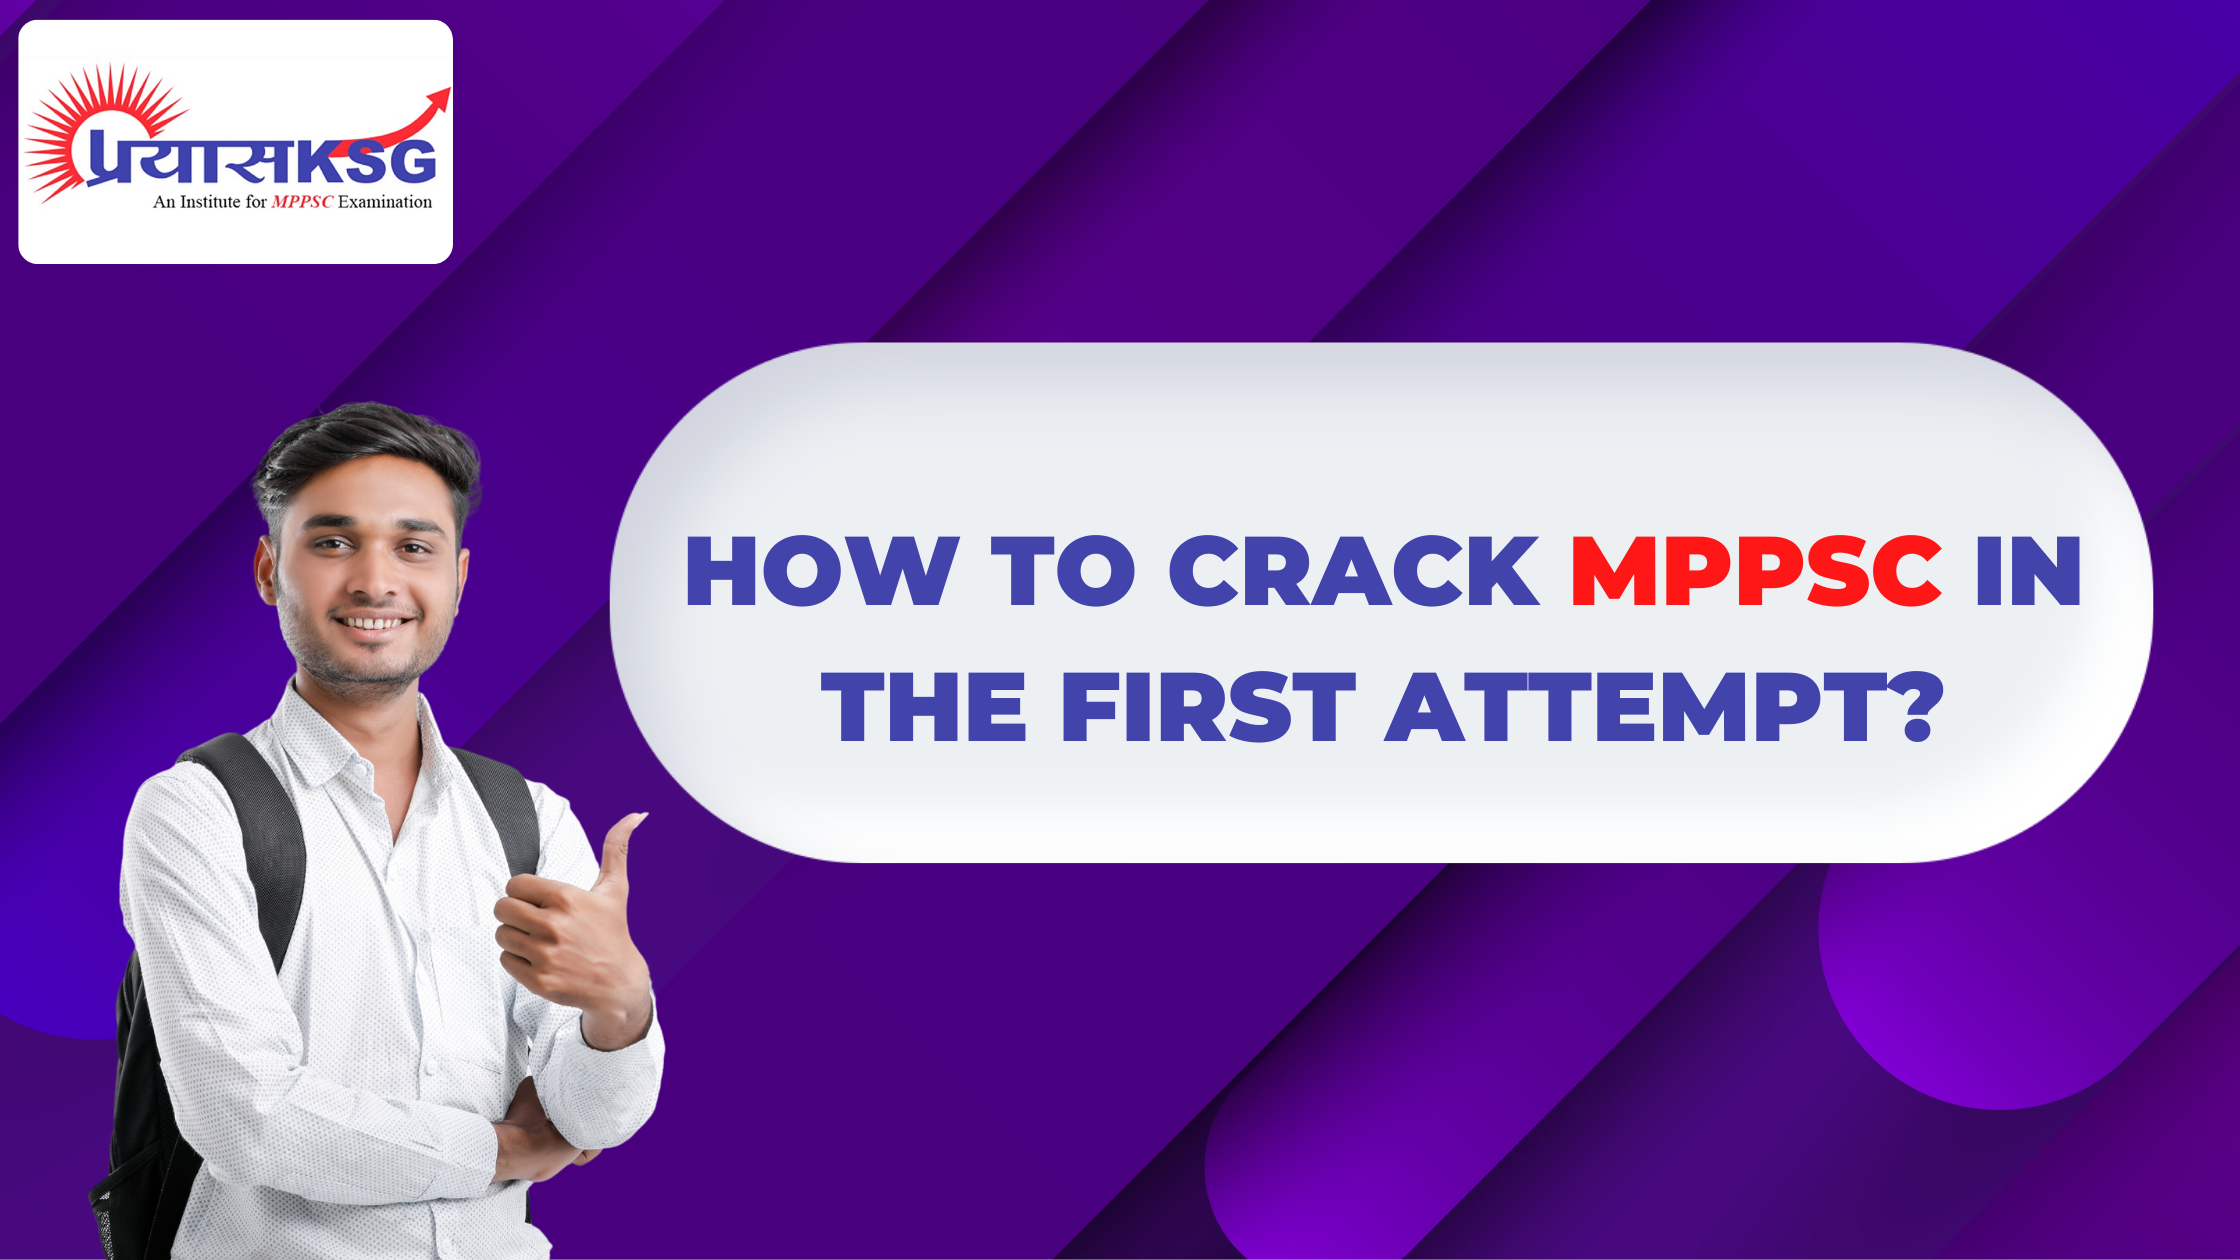 How to Crack MPPSC in the First Attempt